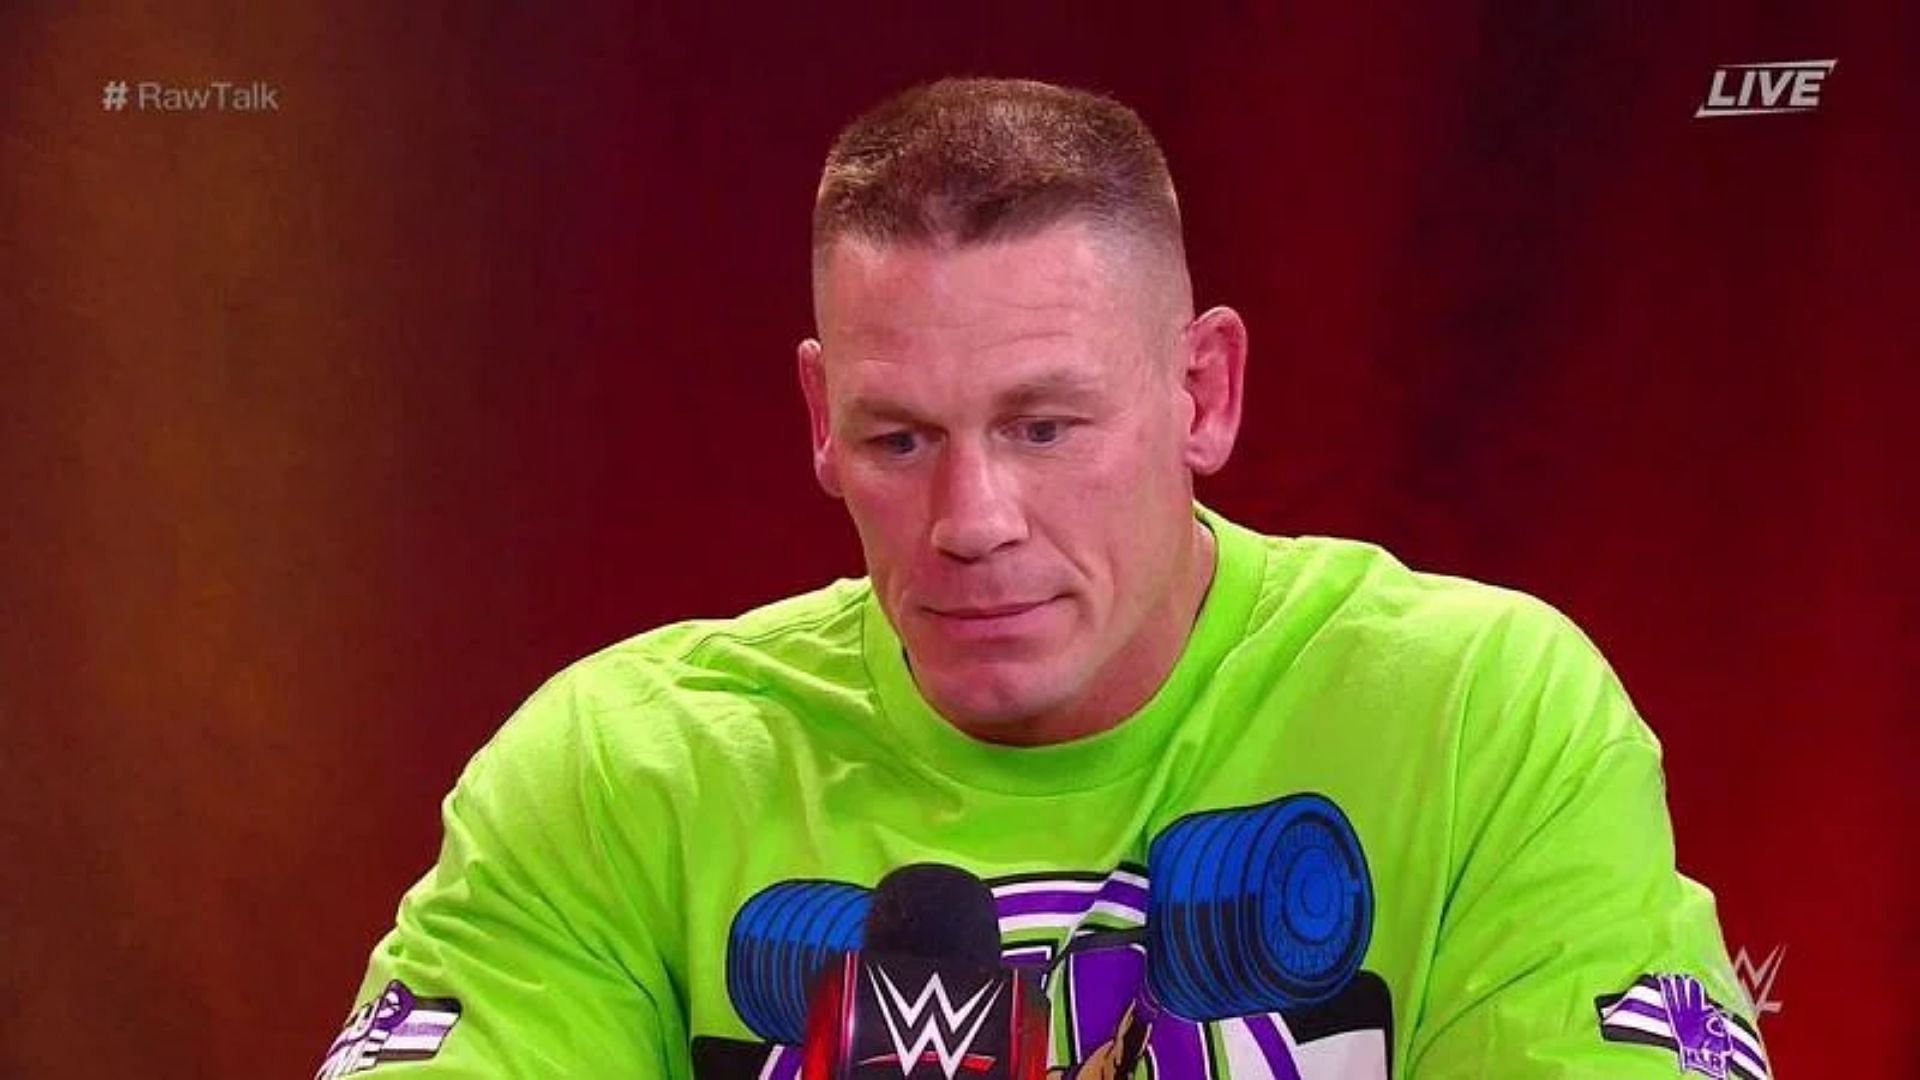 John Cena is widely viewed as one of WWE